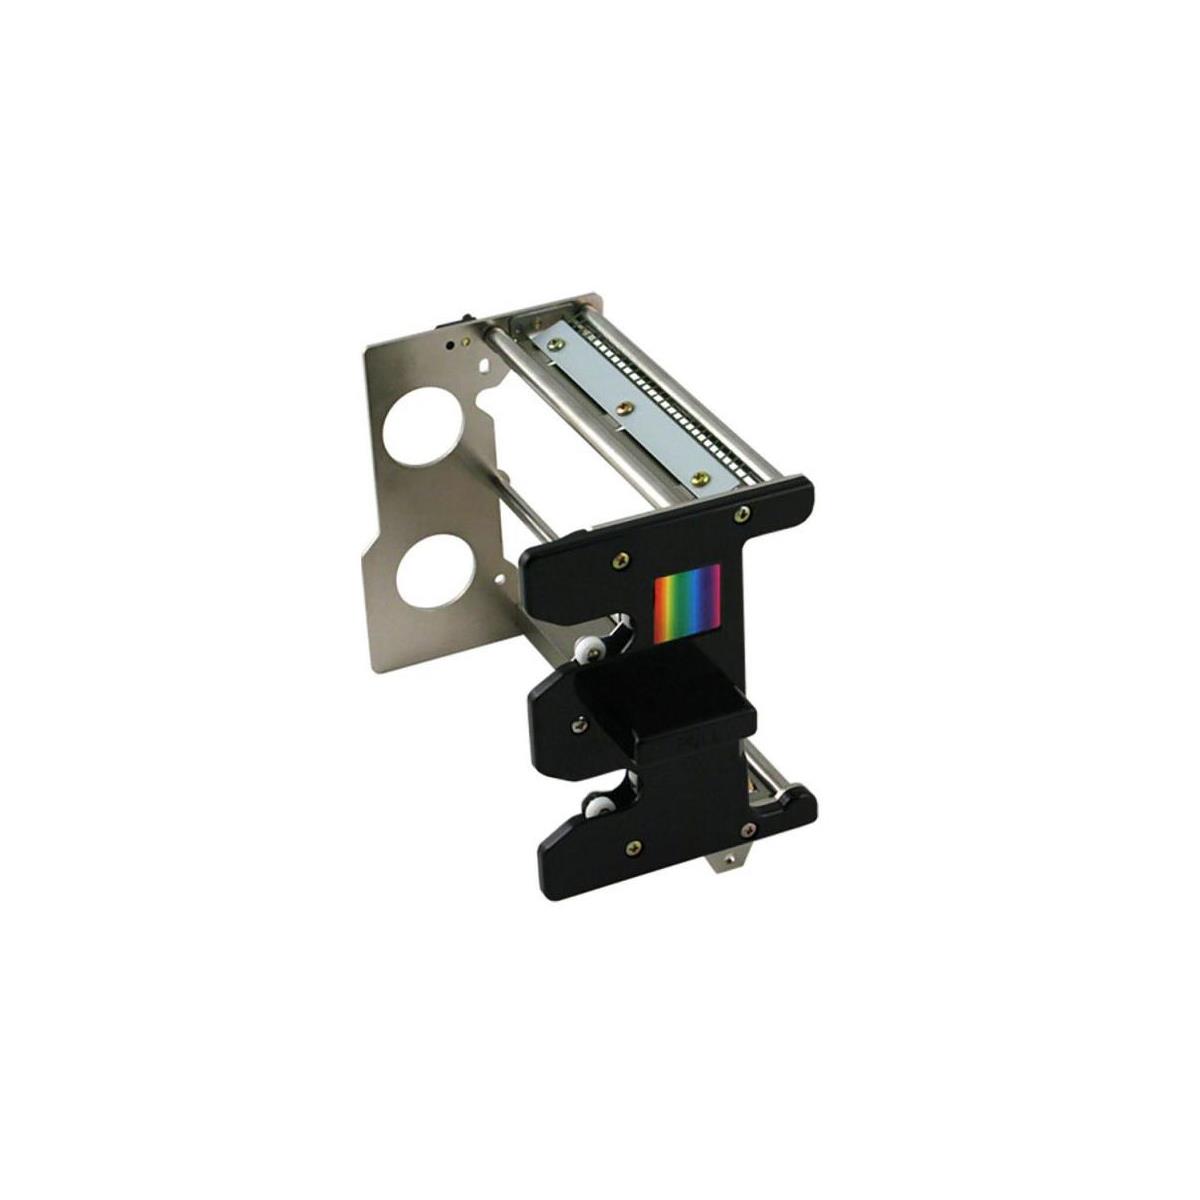 Image of Microboards Technology P-55 Thermal Printer Cartridge for Versamax Color Ribbon